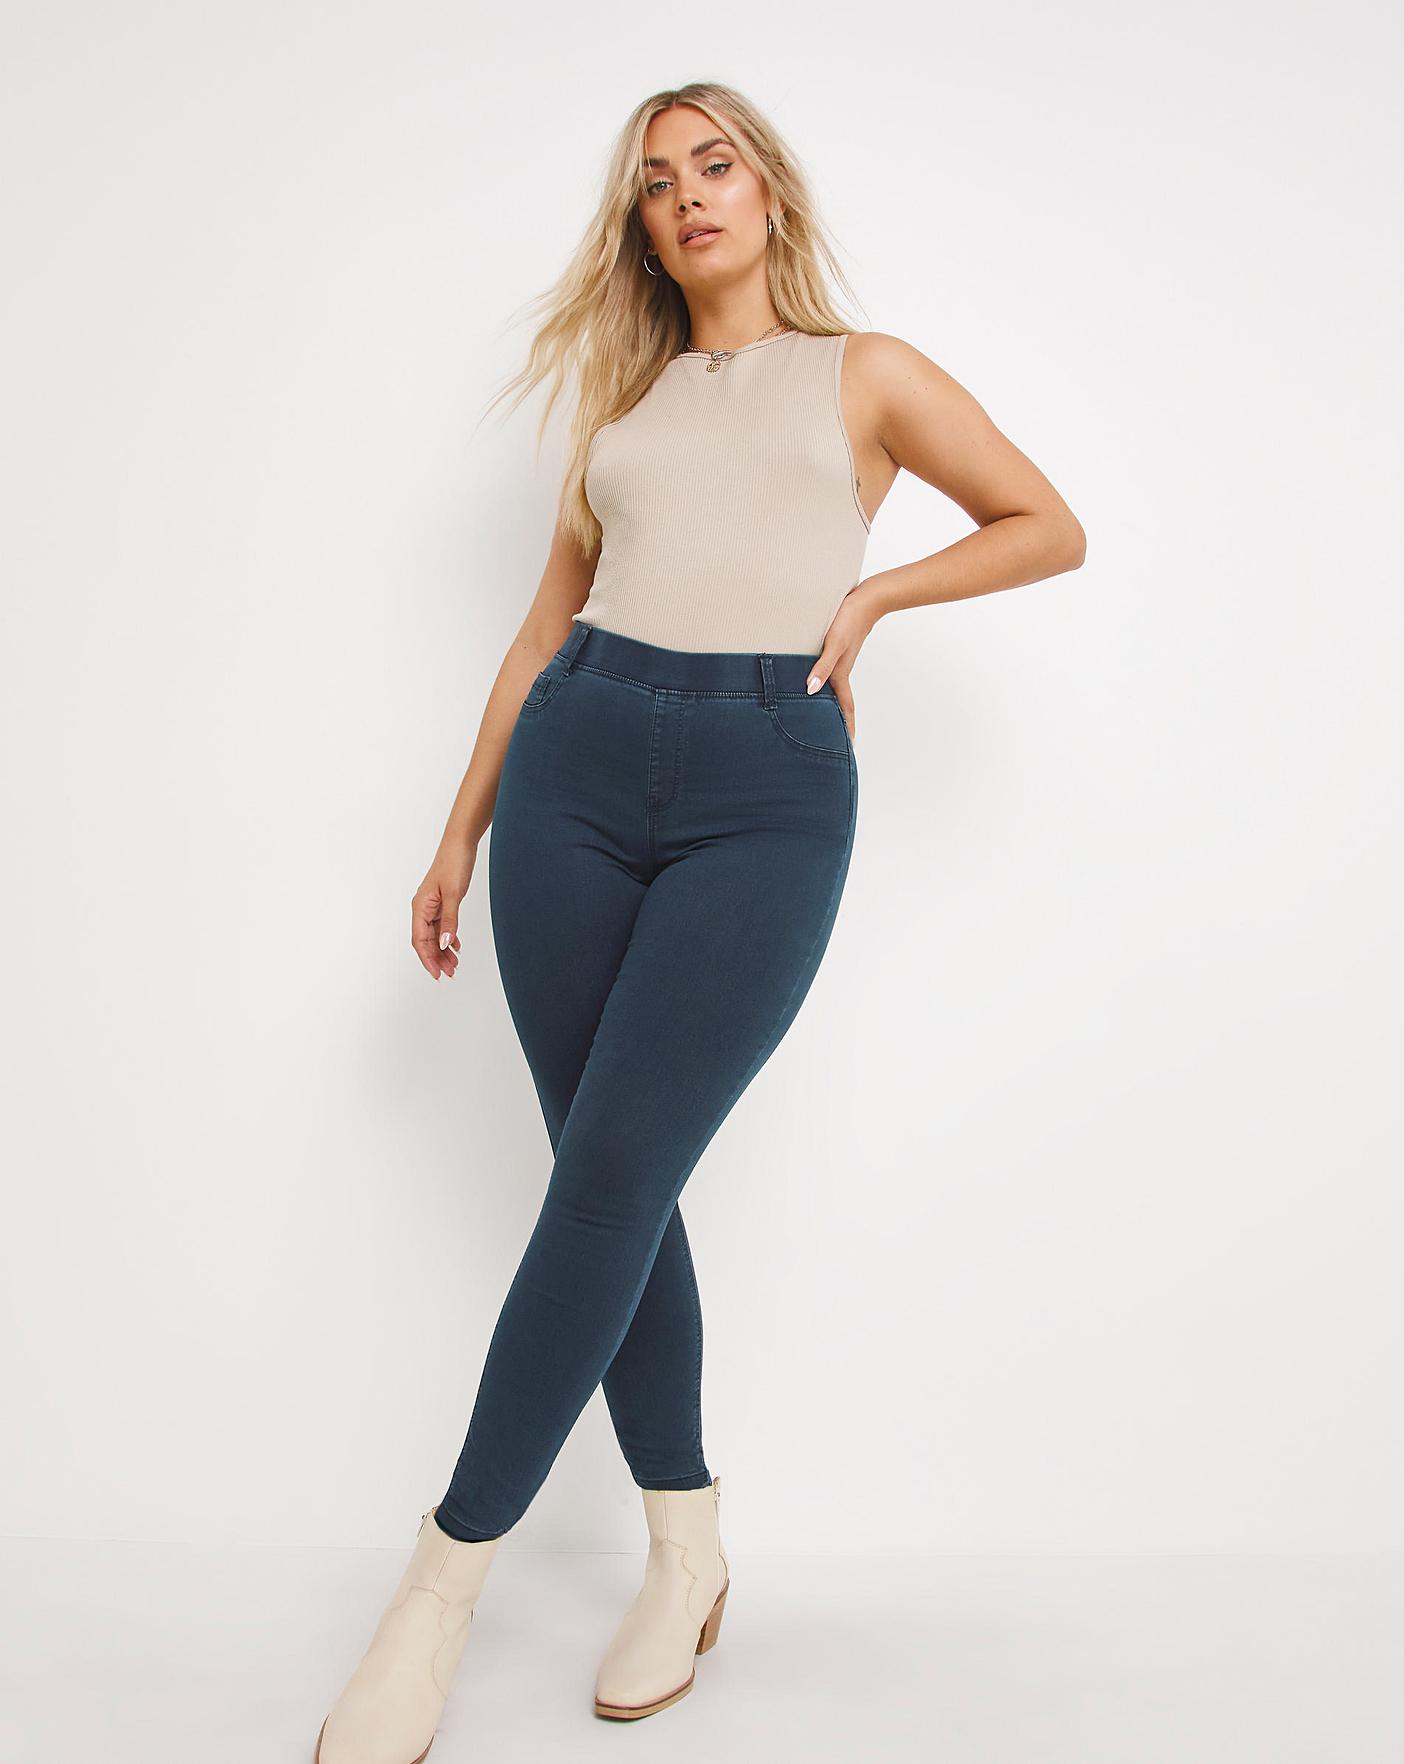 PERFECT PULL-ON JEGGINGS